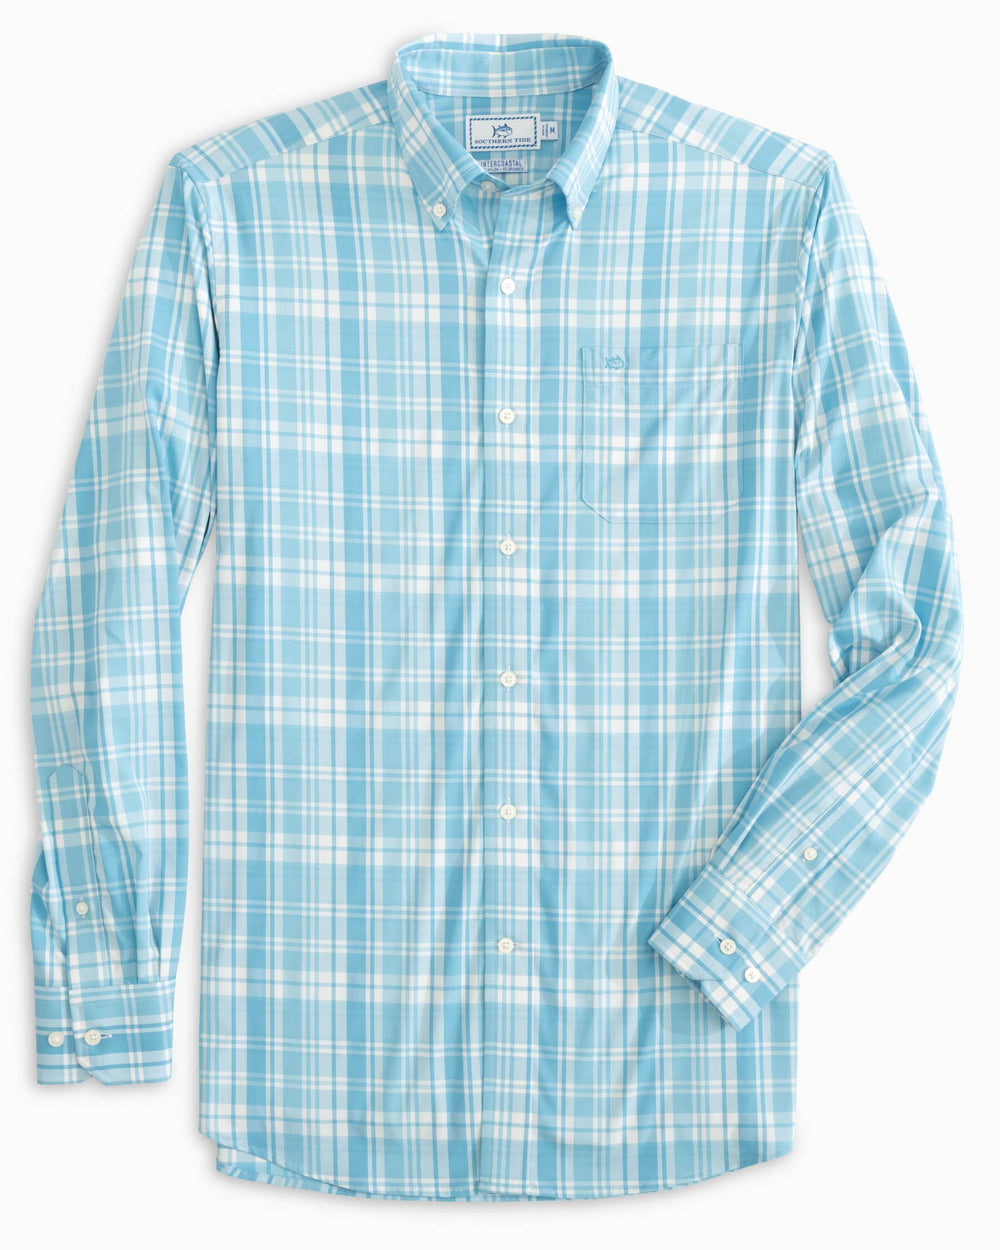 The front view of the Southern Tide Palm Cayon Plaid Intercoastal Sport Shirts by Southern Tide - Rain Water